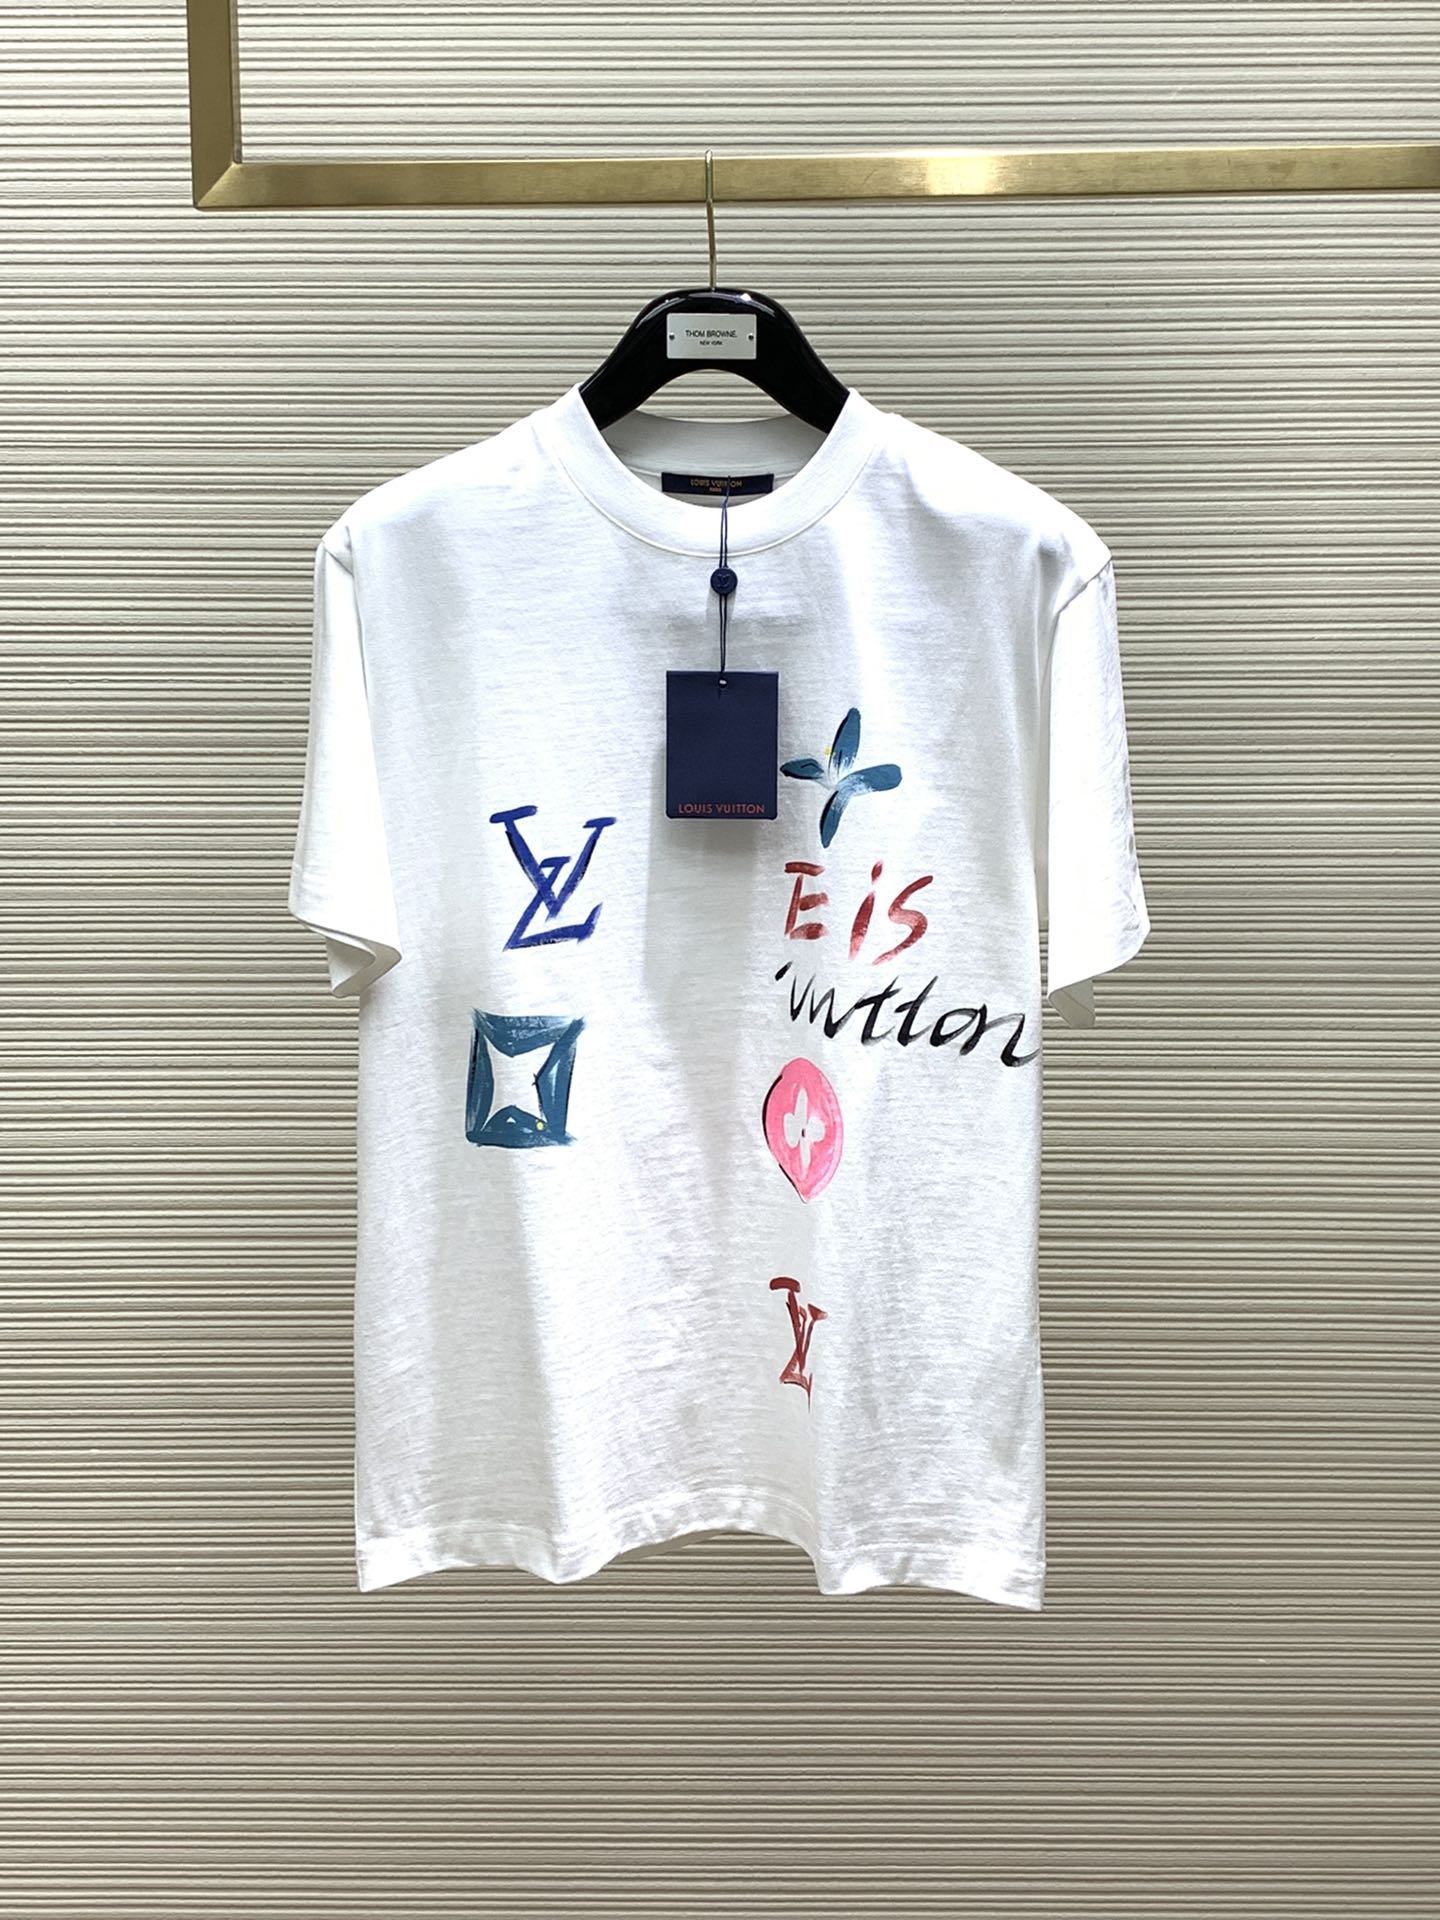 Louis Vuitton Clothing T-Shirt Replicas Buy Special
 Printing Spring/Summer Collection Fashion Short Sleeve